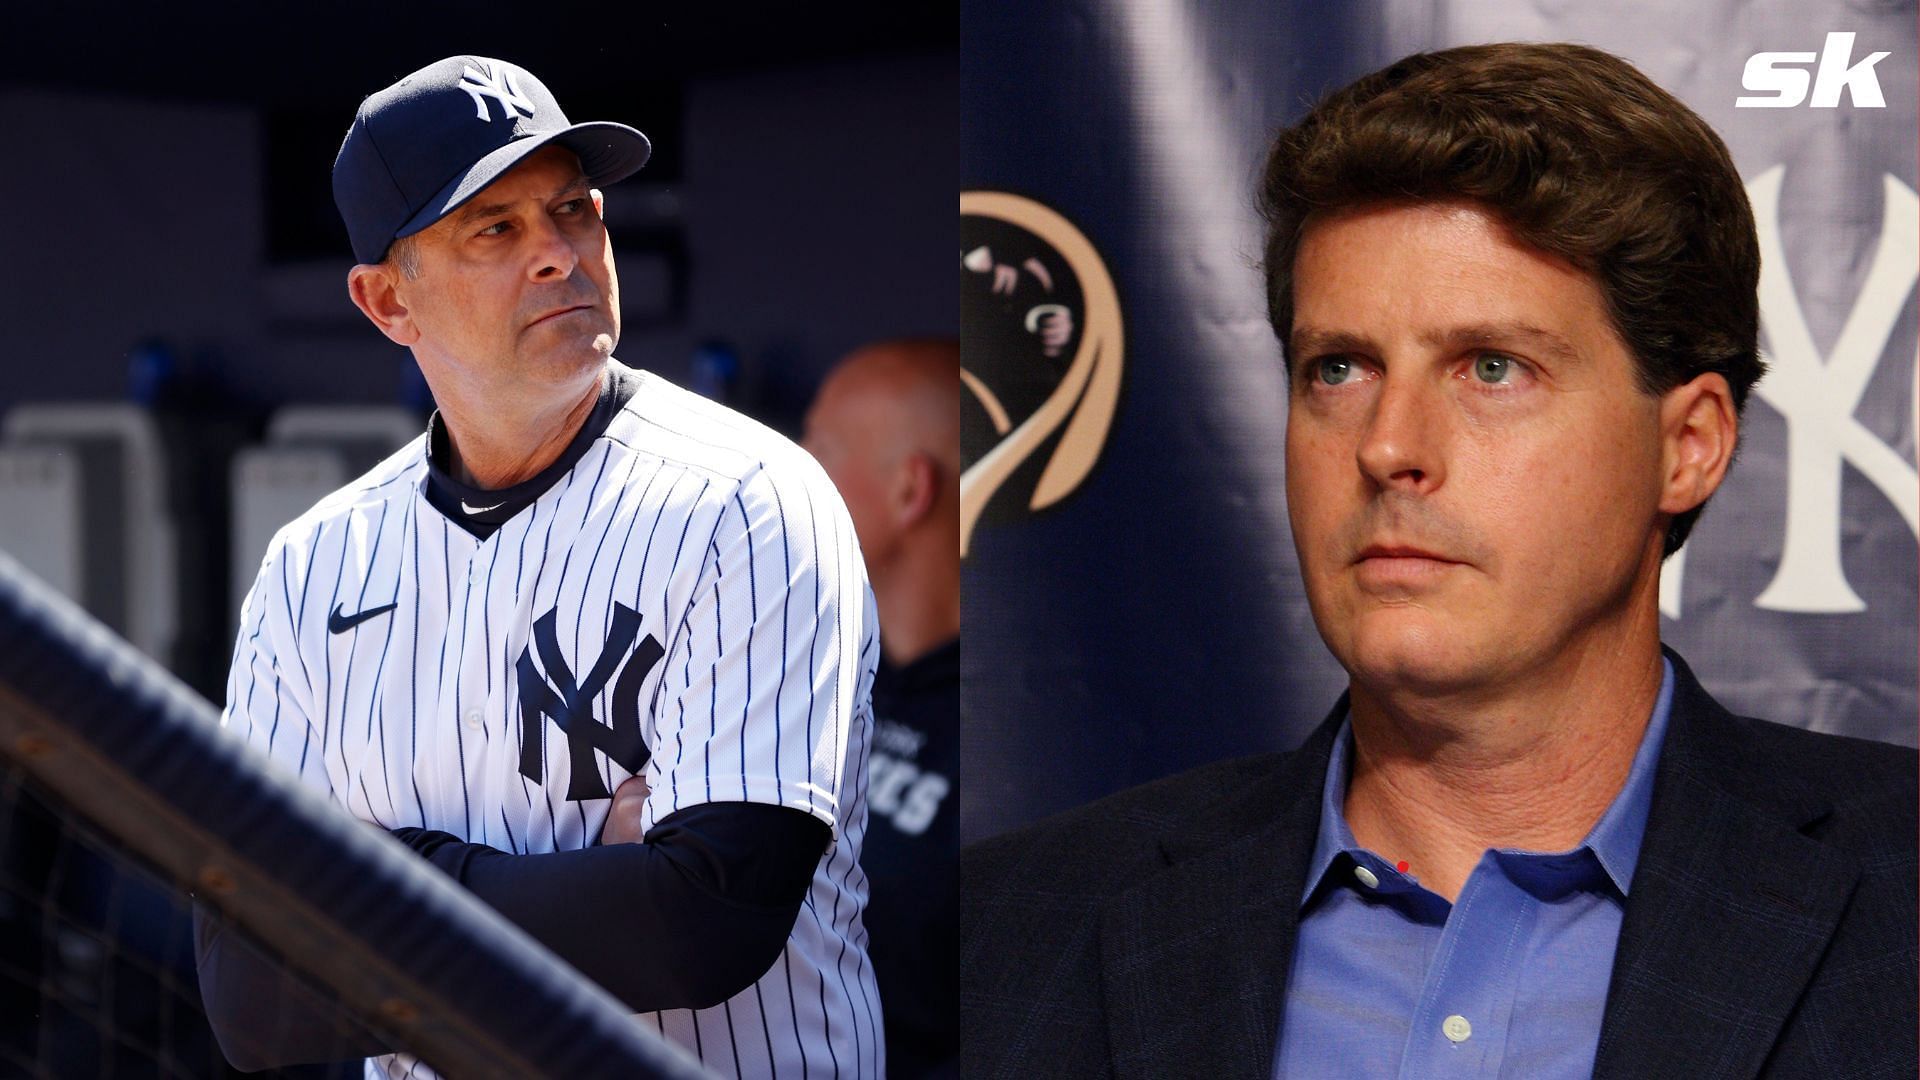 Aaron Boone evidently does not agree with Hal Steinbrenner